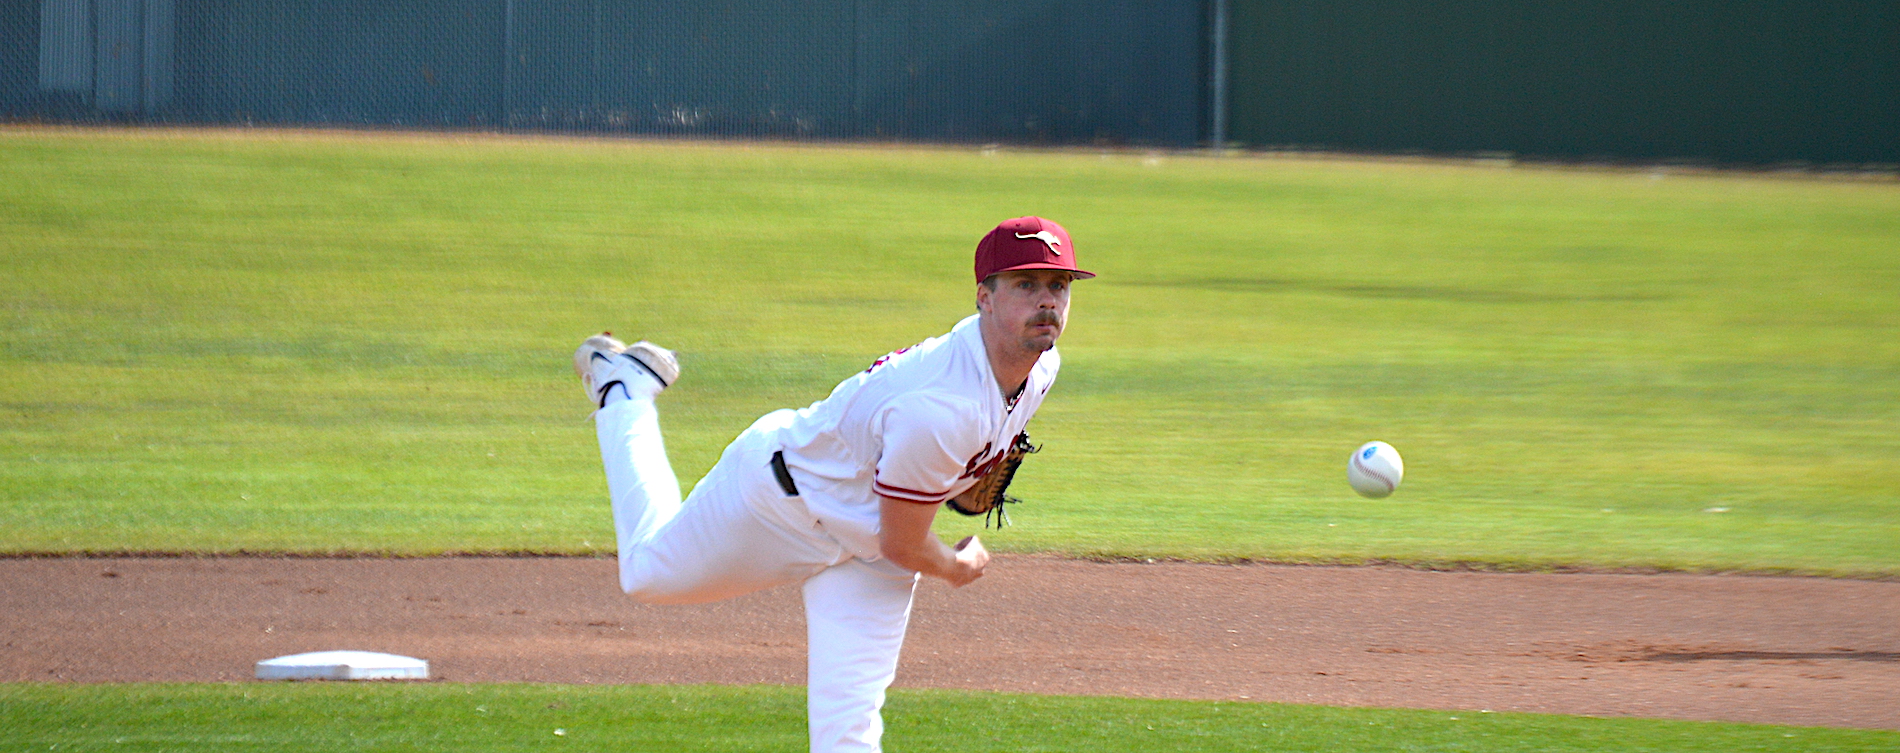 'Roos Split Twinbill with St. Thomas